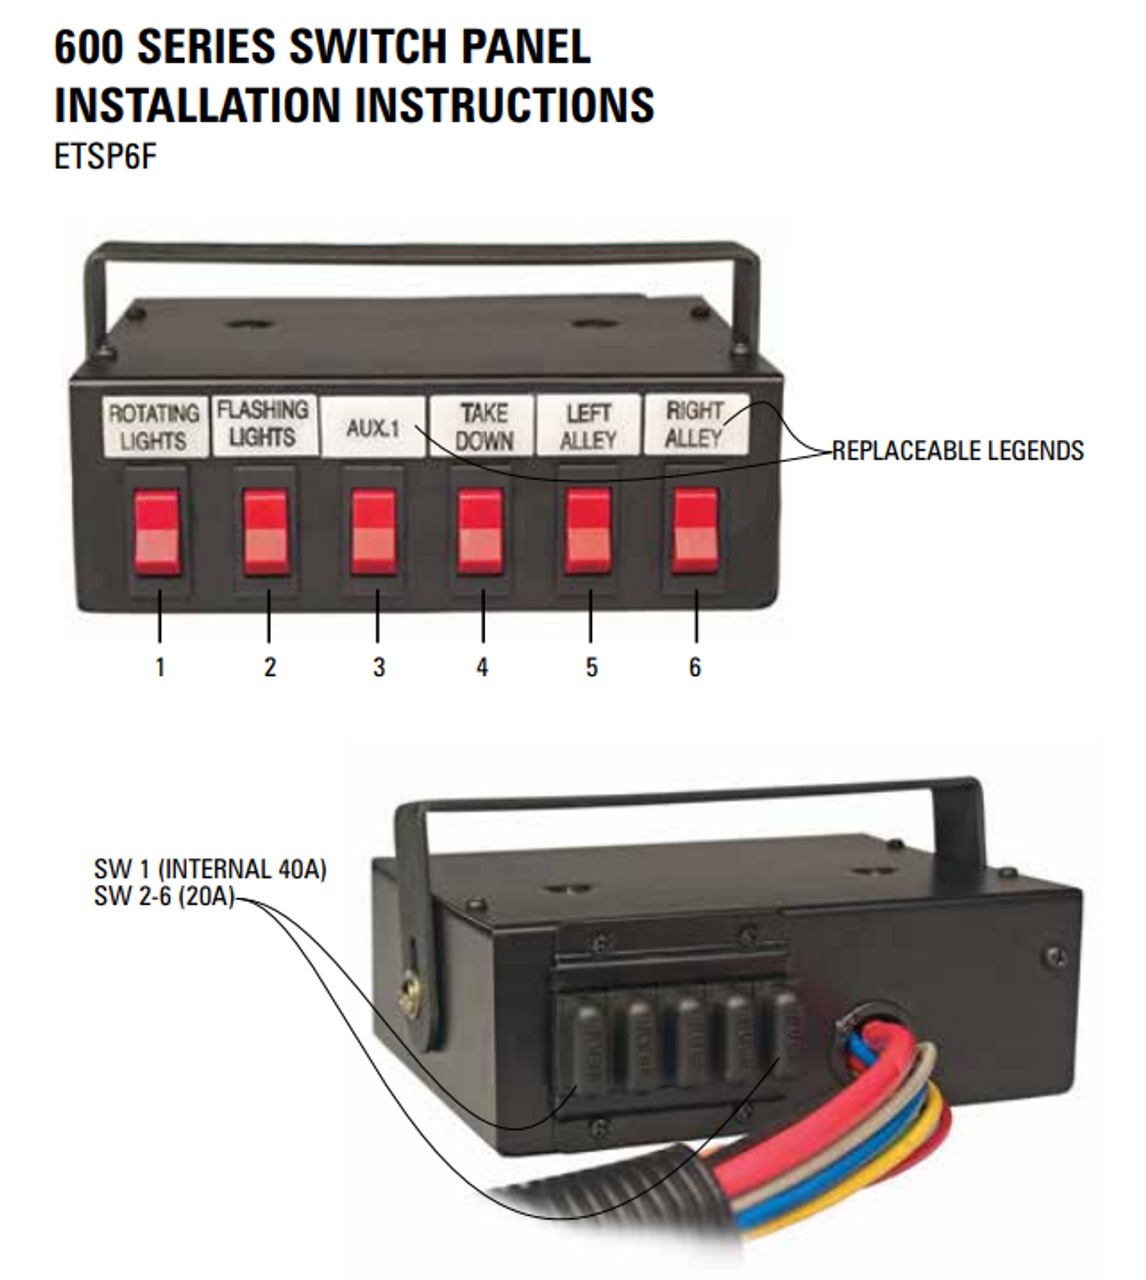 SoundOff Signal ETSP6F - 600 Series Switch w/ 6 Functions: 6 Rocker Switches, includes Universal Bail Bracket - 12v